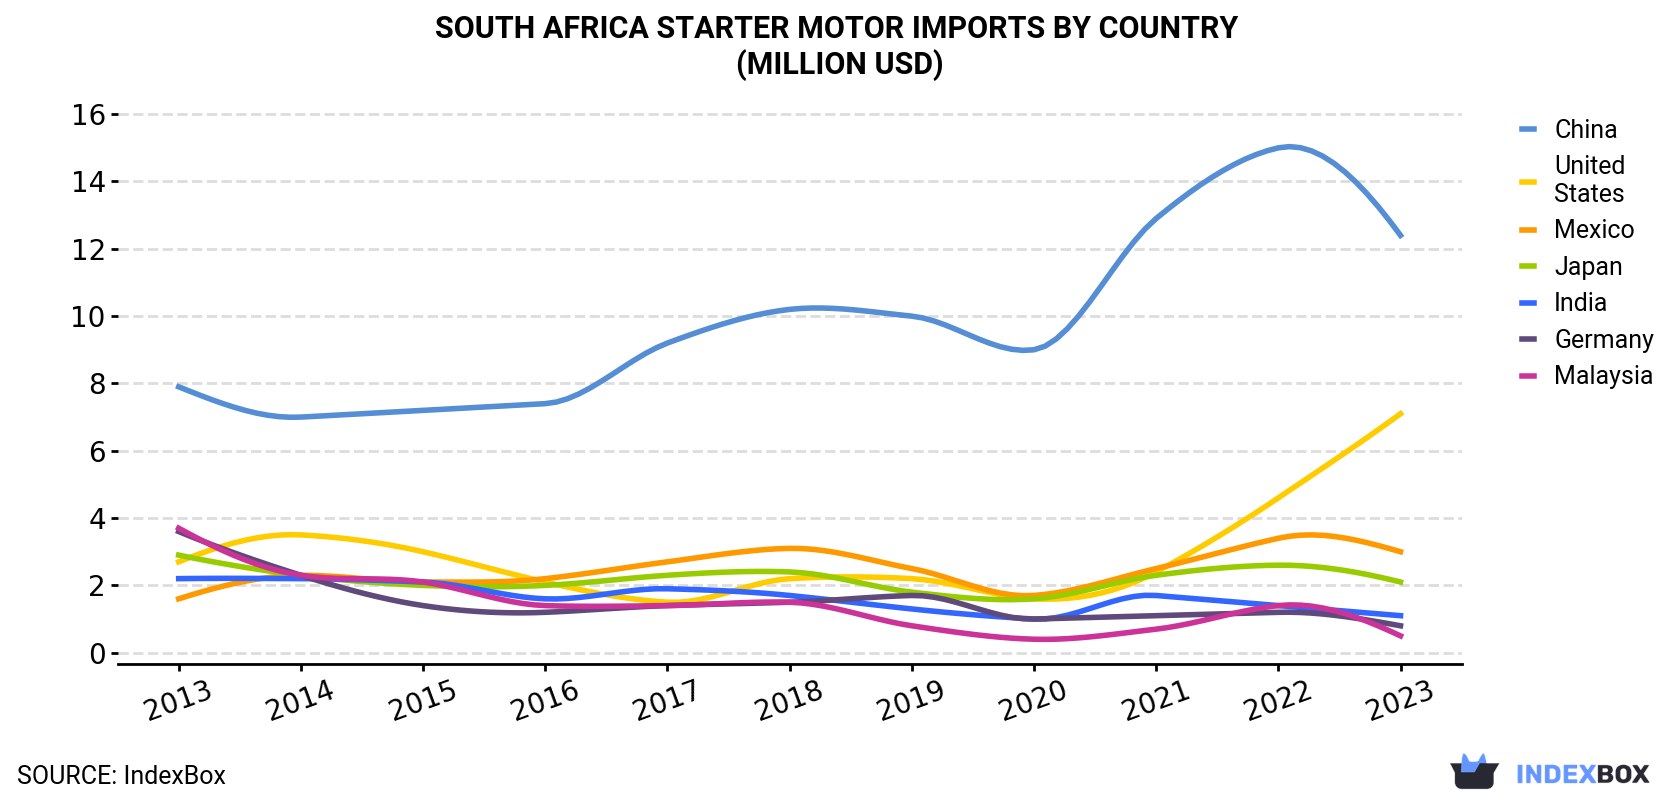 South Africa Starter Motor Imports By Country (Million USD)